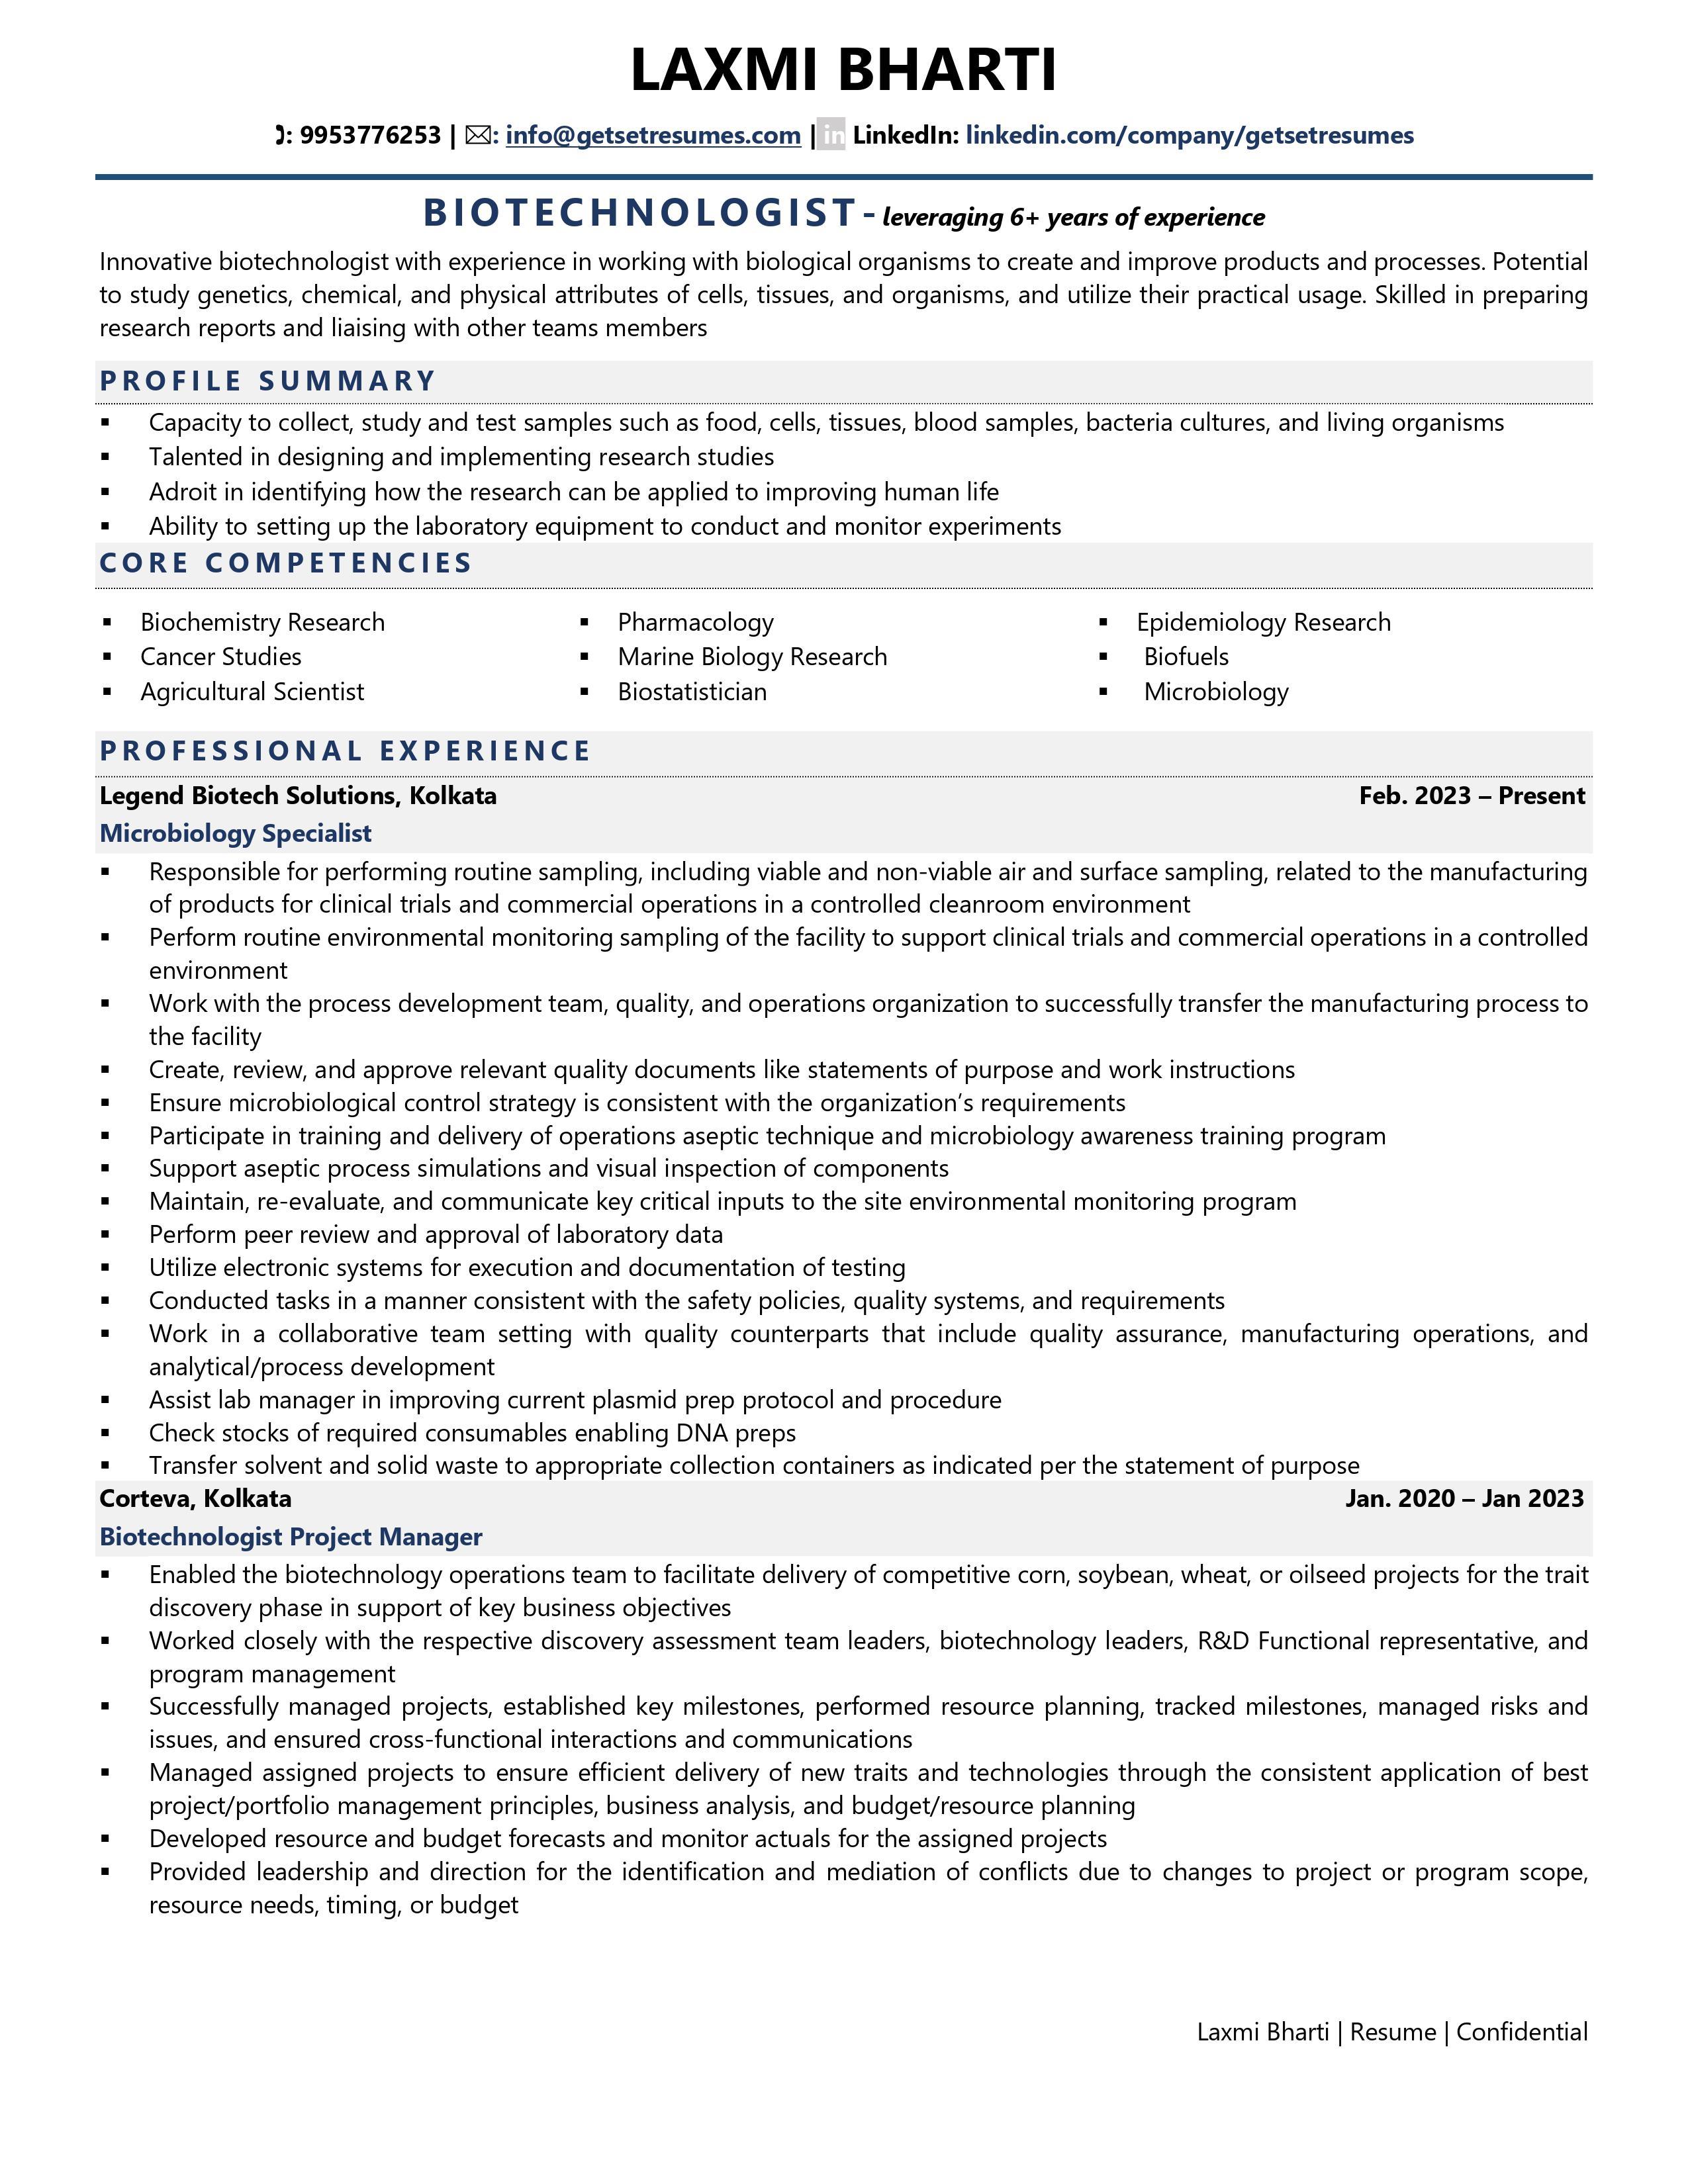 Biotechnologist - Resume Example & Template